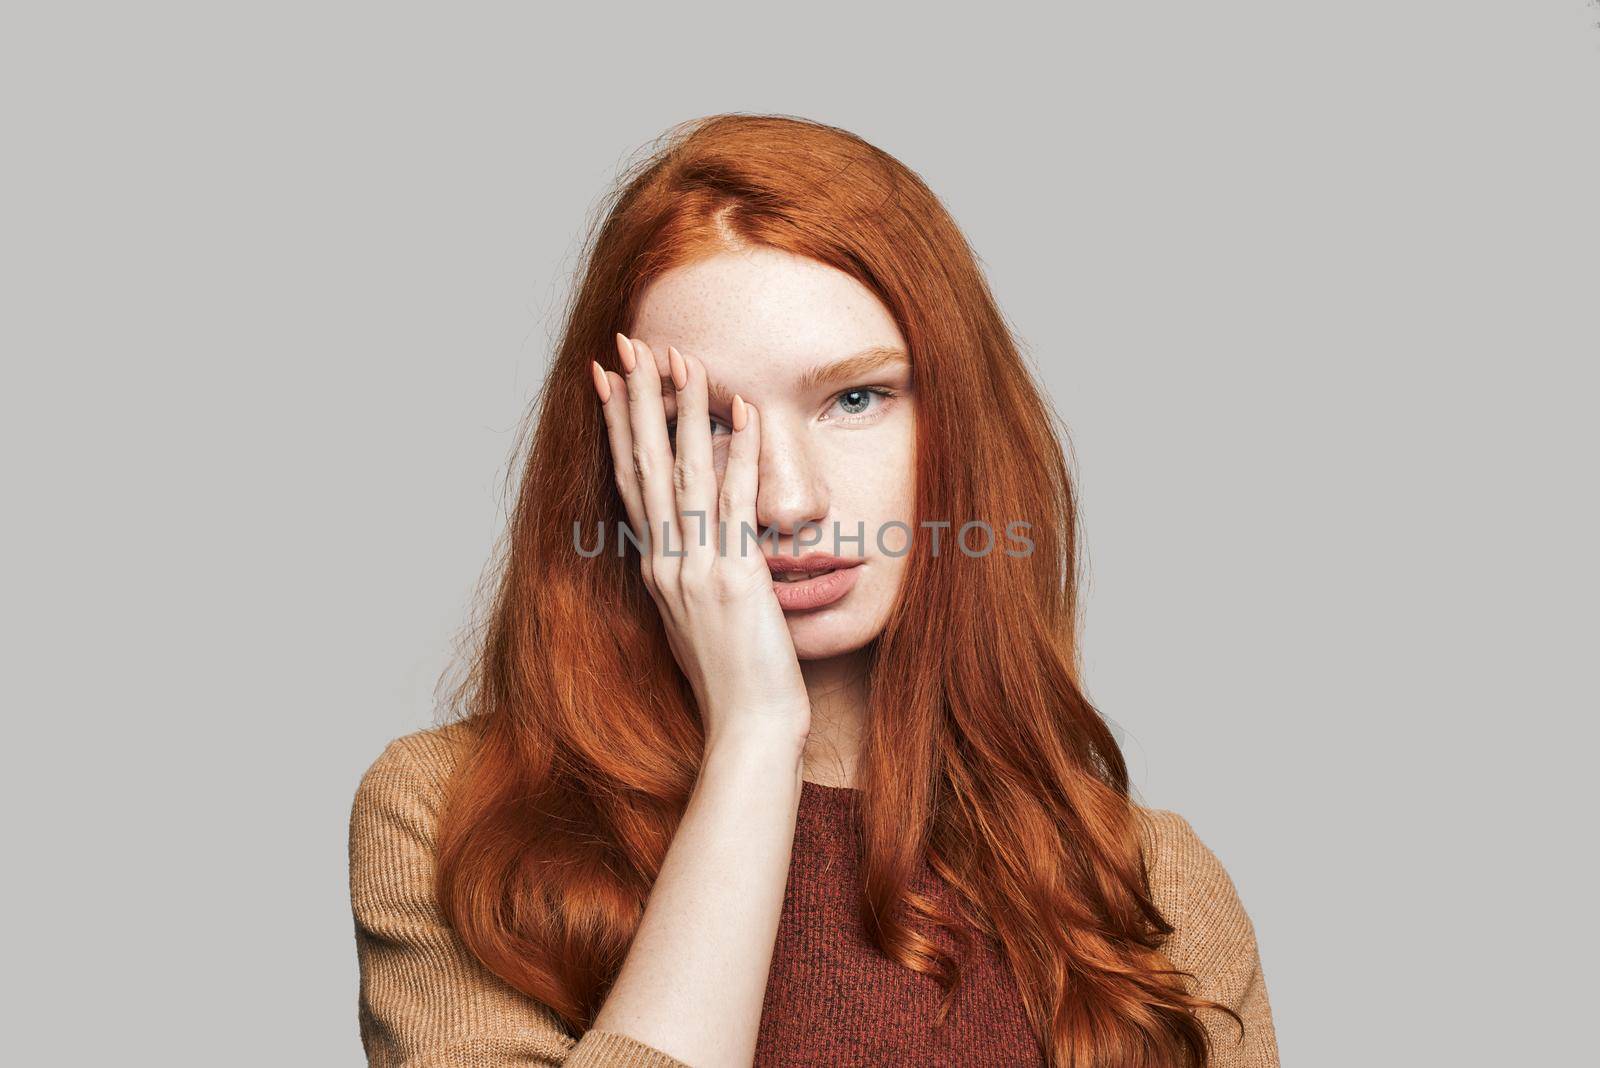 Studio shot of young and cute teenage girl with red silky hair covering face with hand and looking at camera while standing against grey background